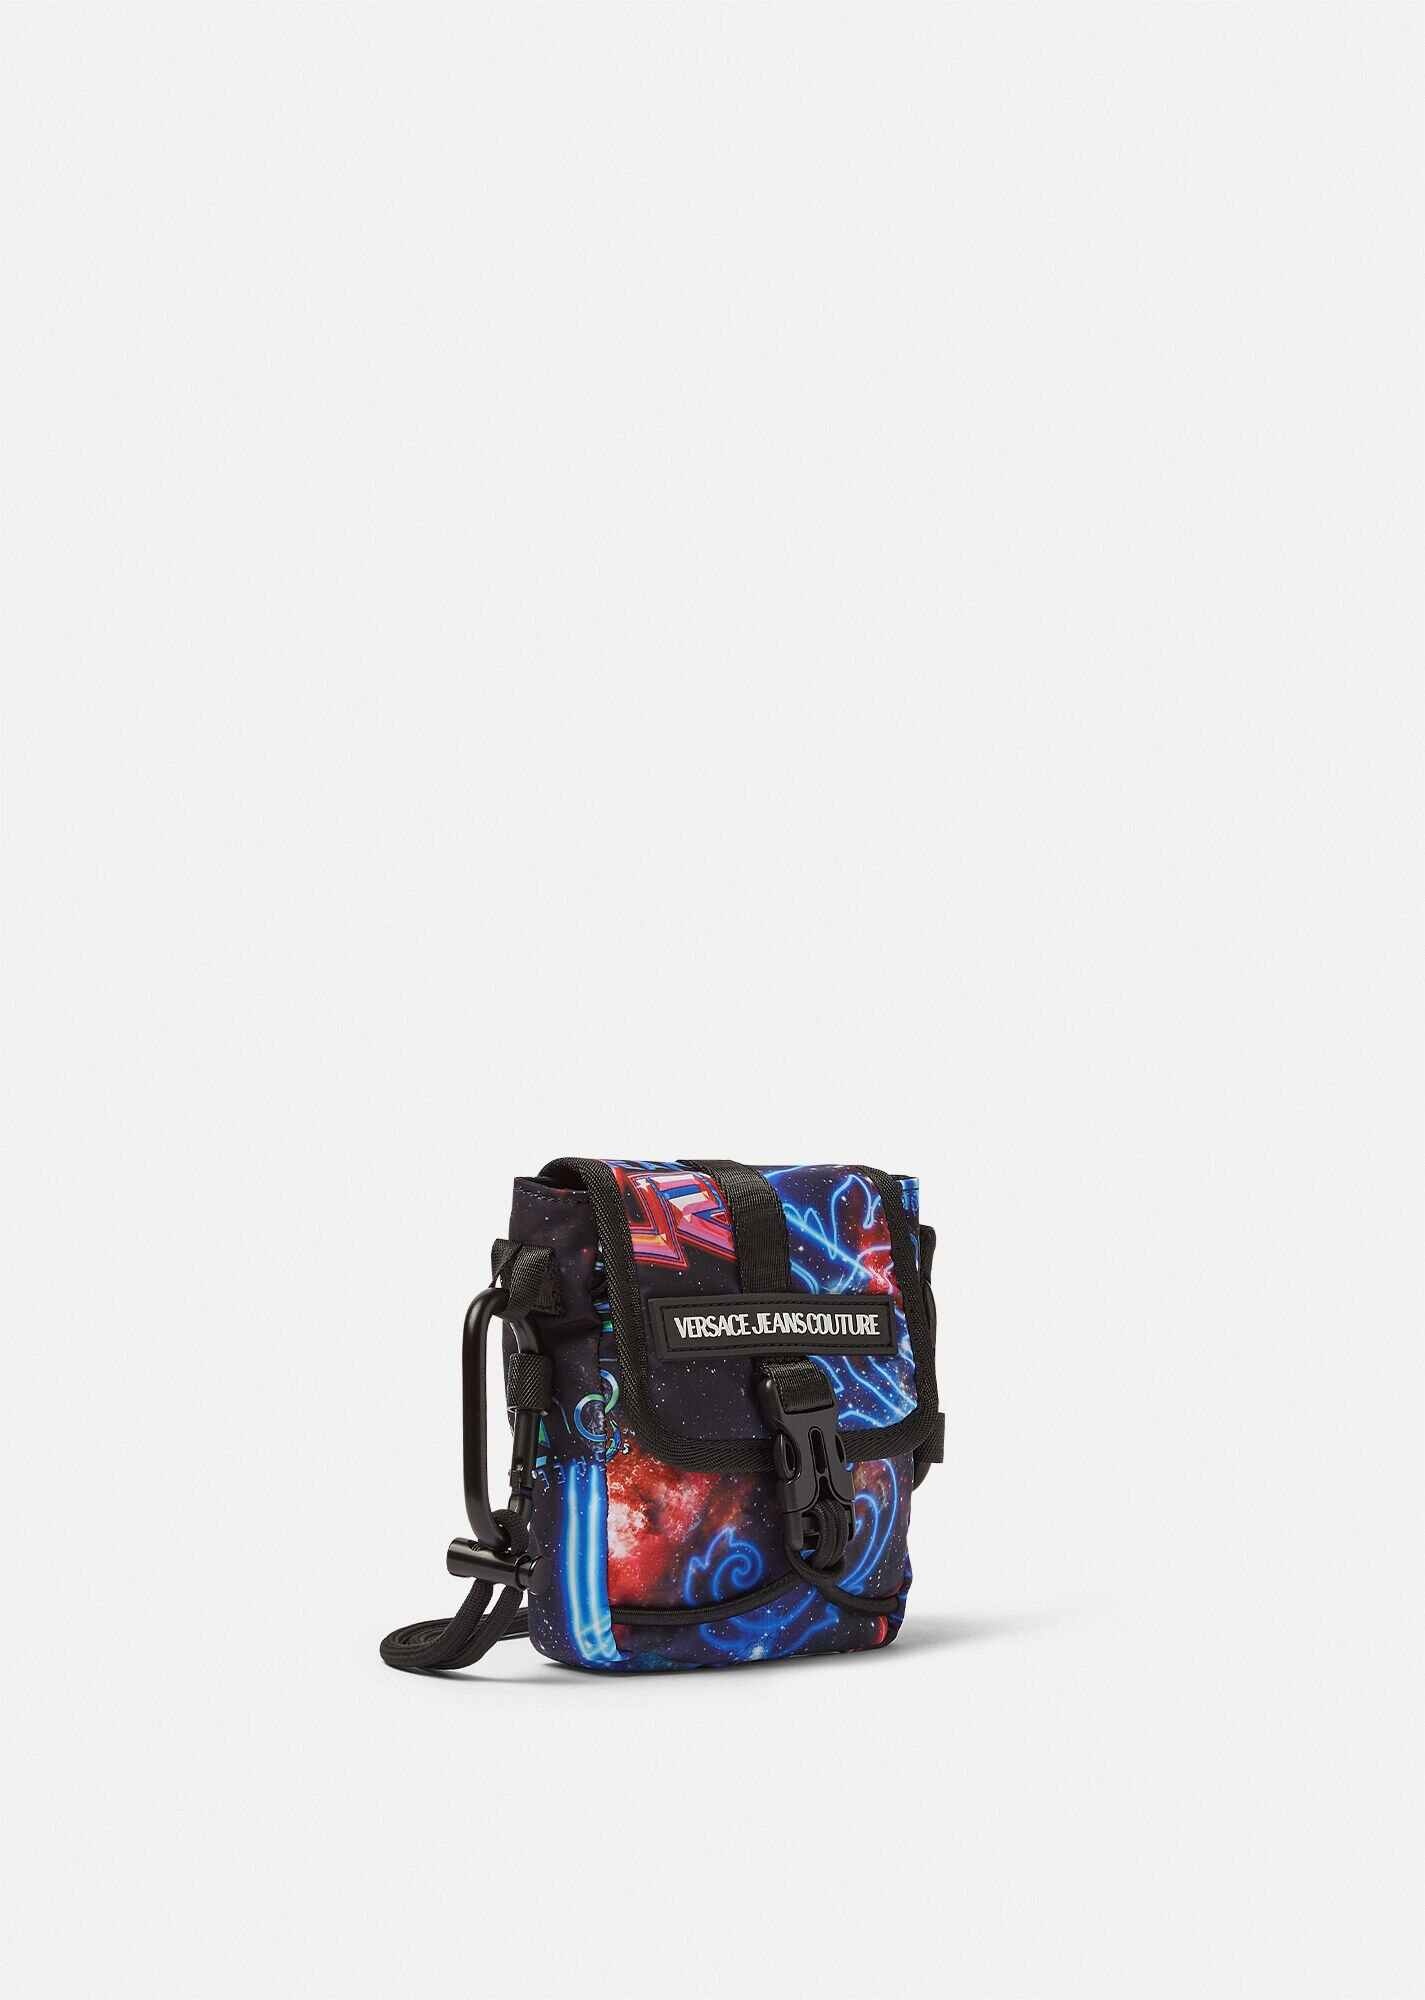 Galaxy Couture Messenger Bag - 2